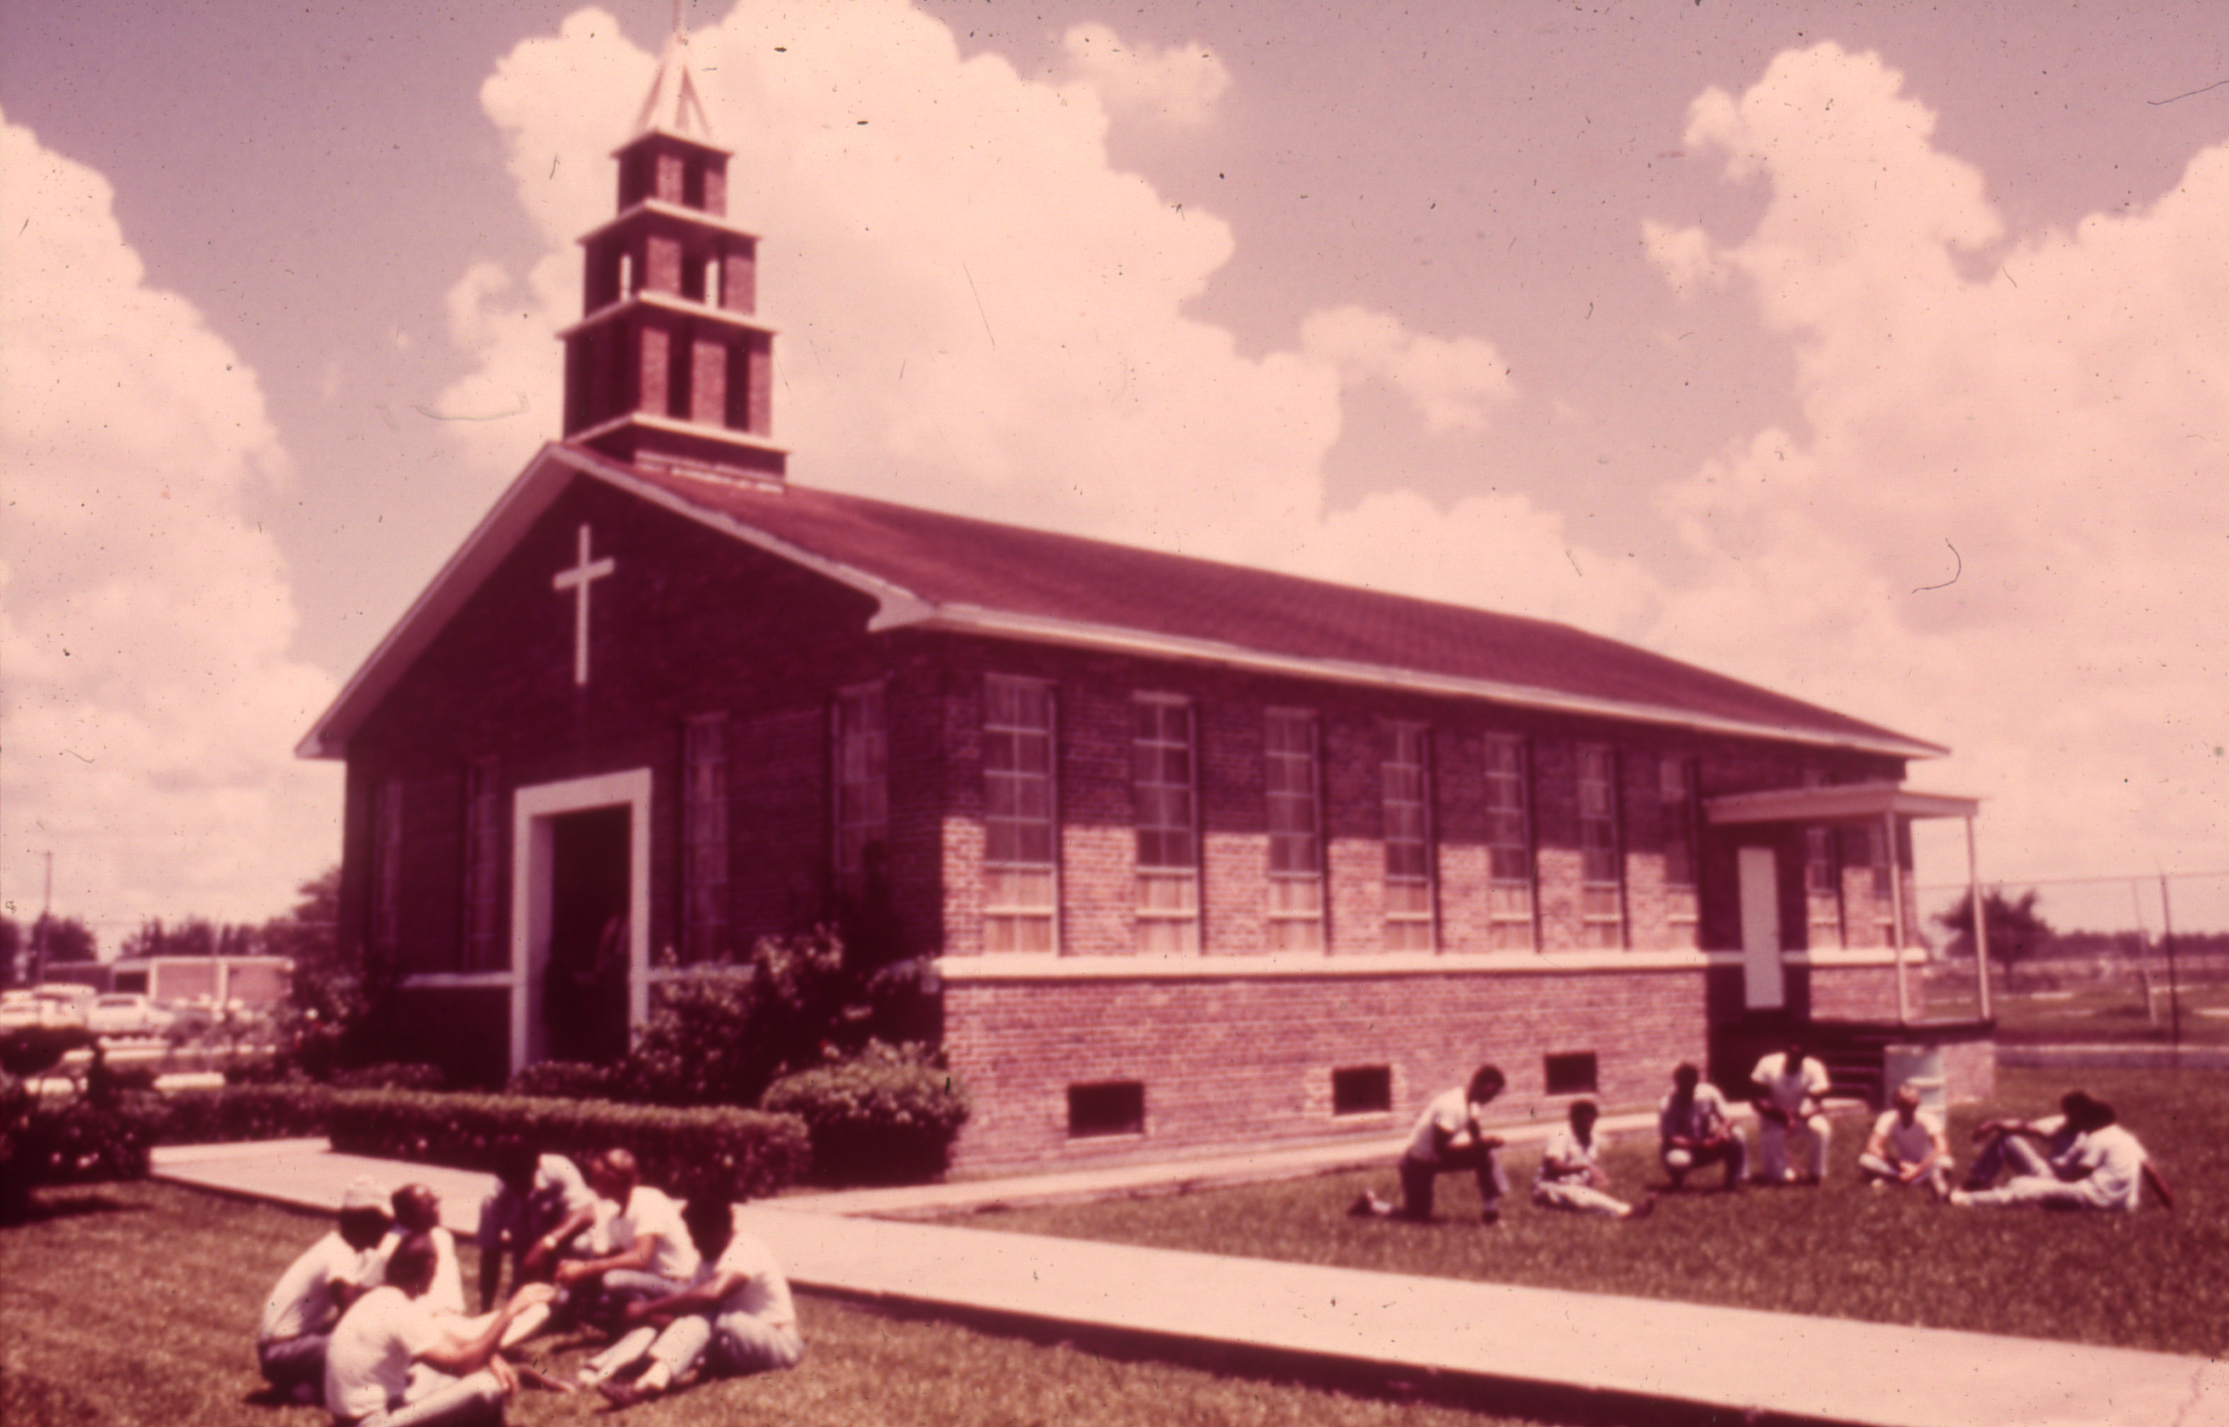 Slide 16: A photo of a chapel, with men sitting in small groups outside in the grass.